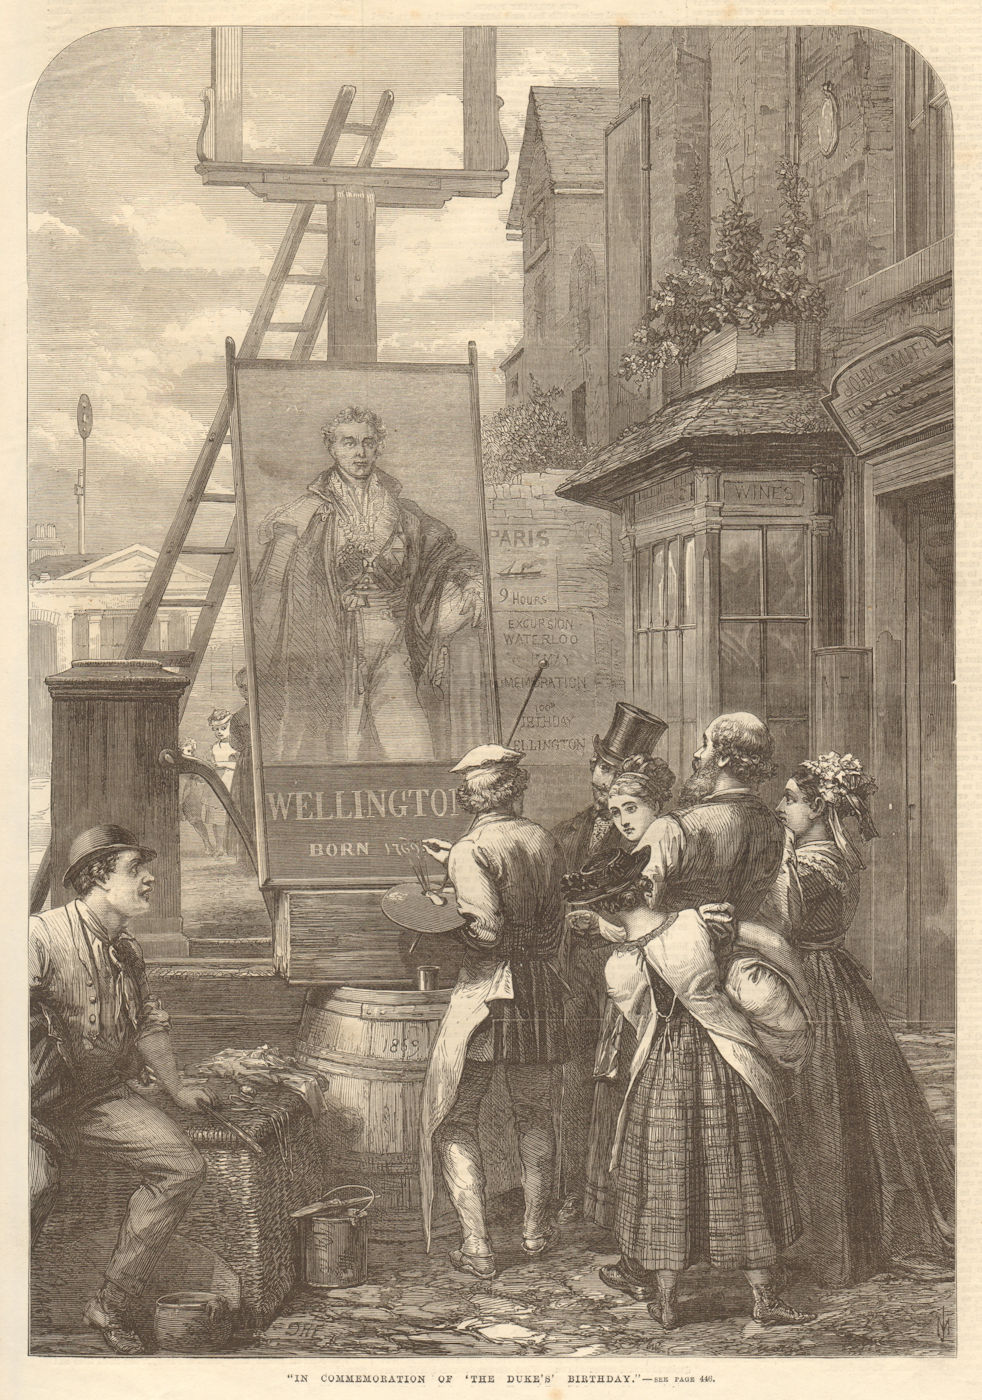 "In commemoration of "The Duke's" birthday". Pubs. Wellington 1869 old print